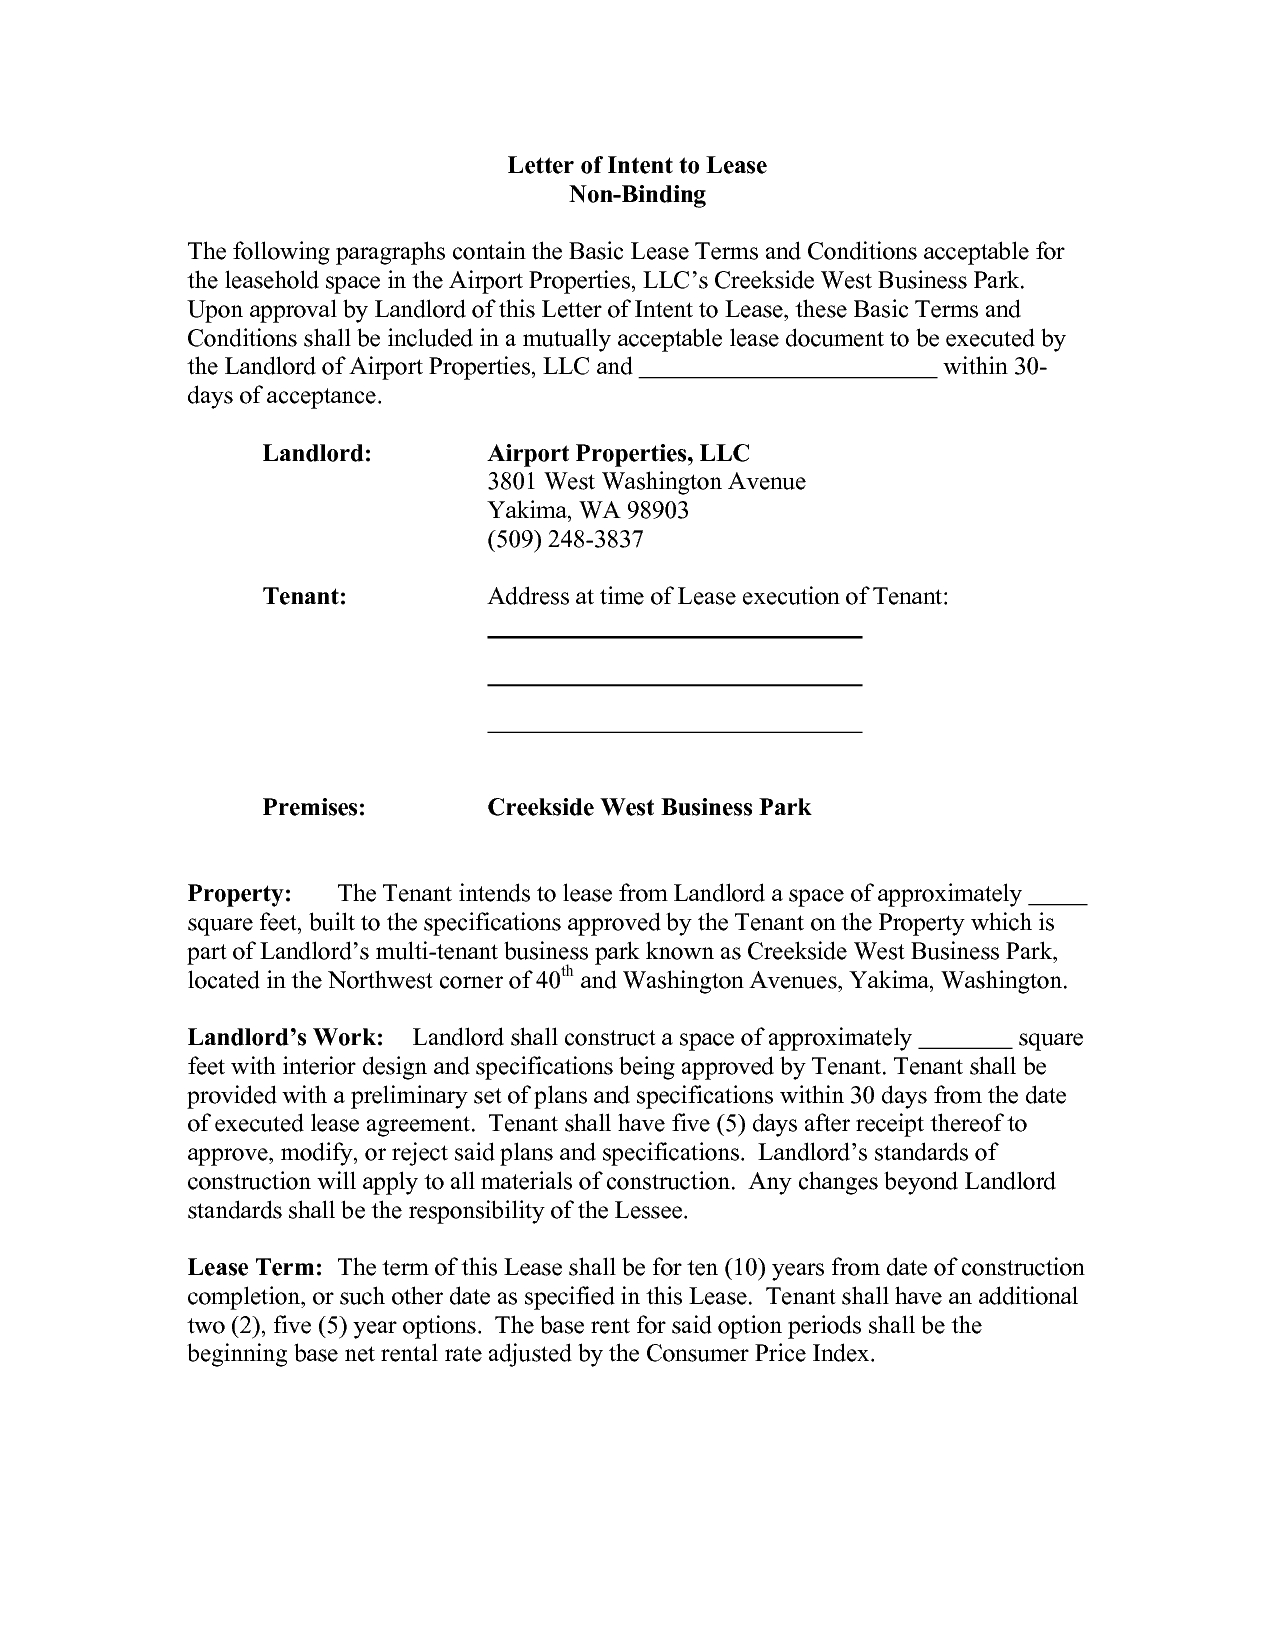 Commercial Real Estate Lease Letter Of Intent Template - Sample Letter Intent Jpeg to Lease Mercial Property Pdf In